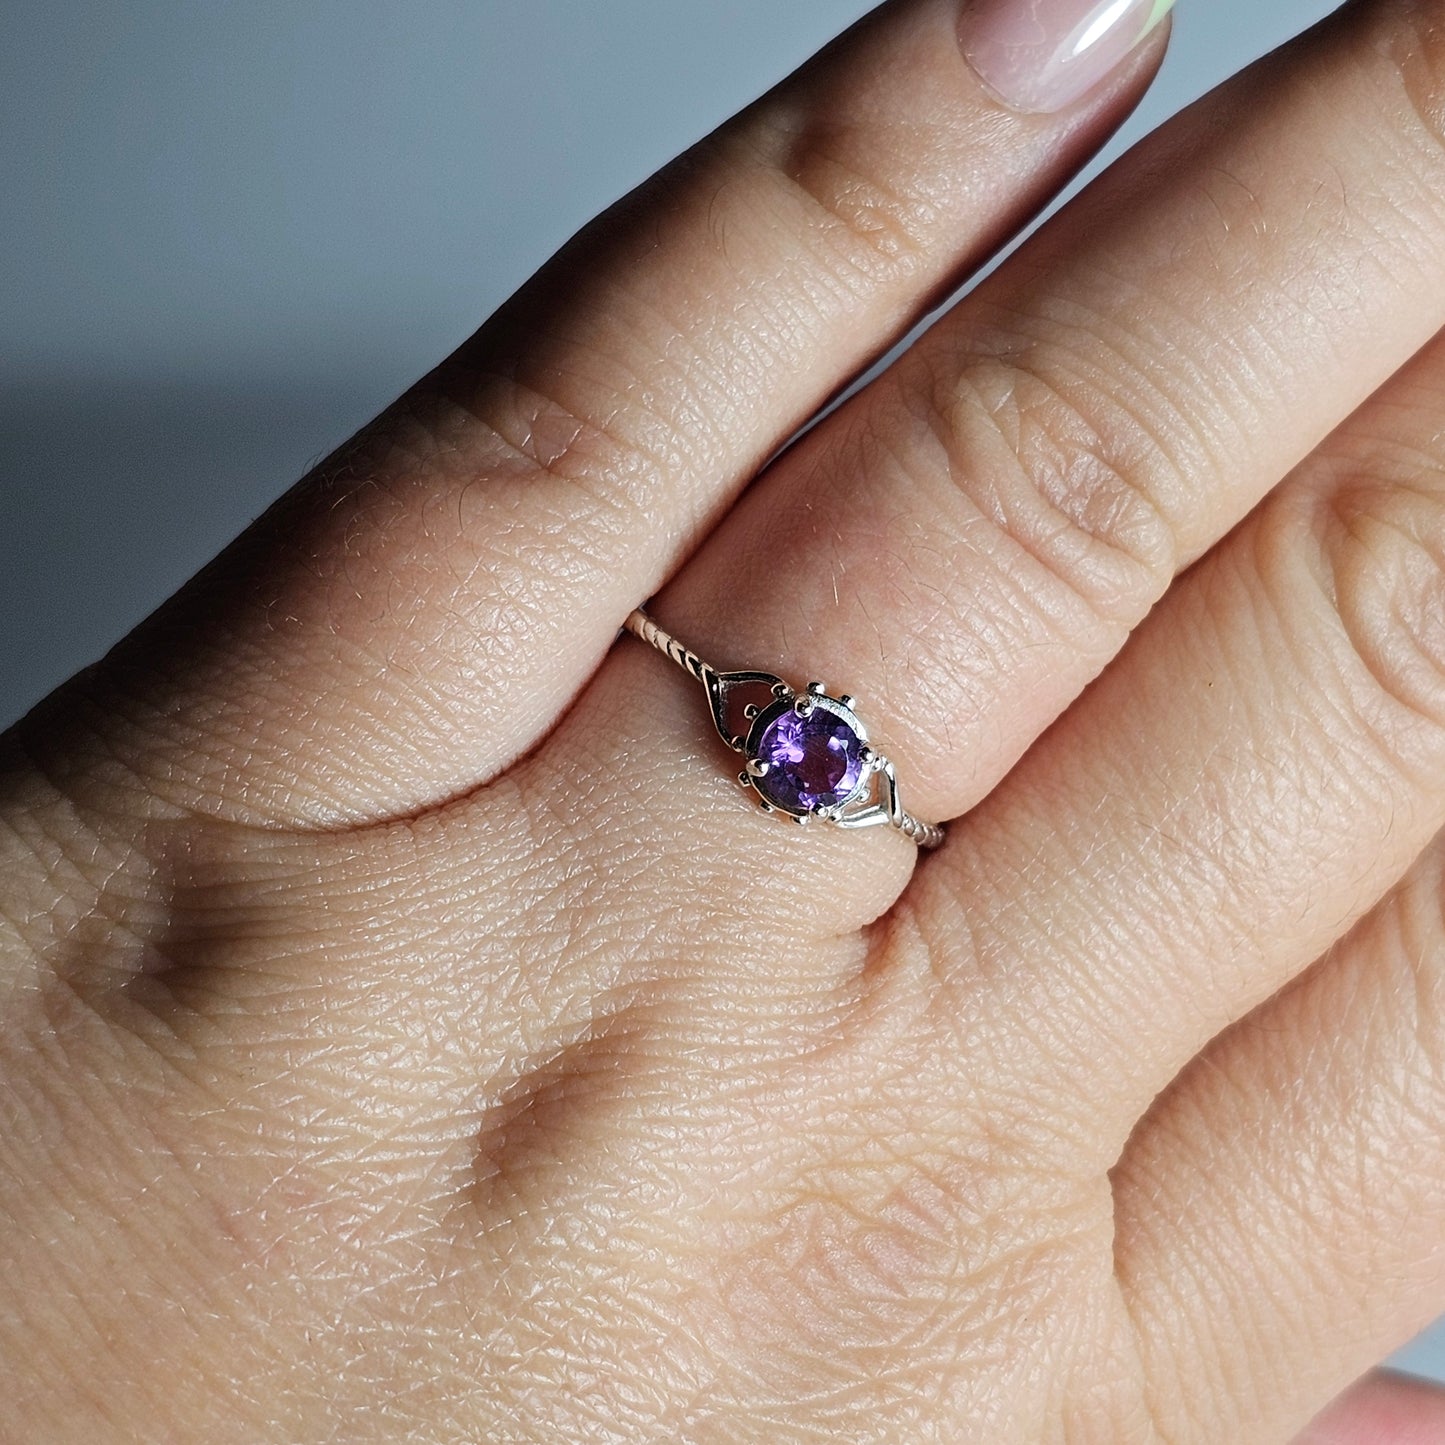 This adjustable fine ring is crafted from sterling silver and features a round Amethyst with heart and twist accented shoulder ring band.